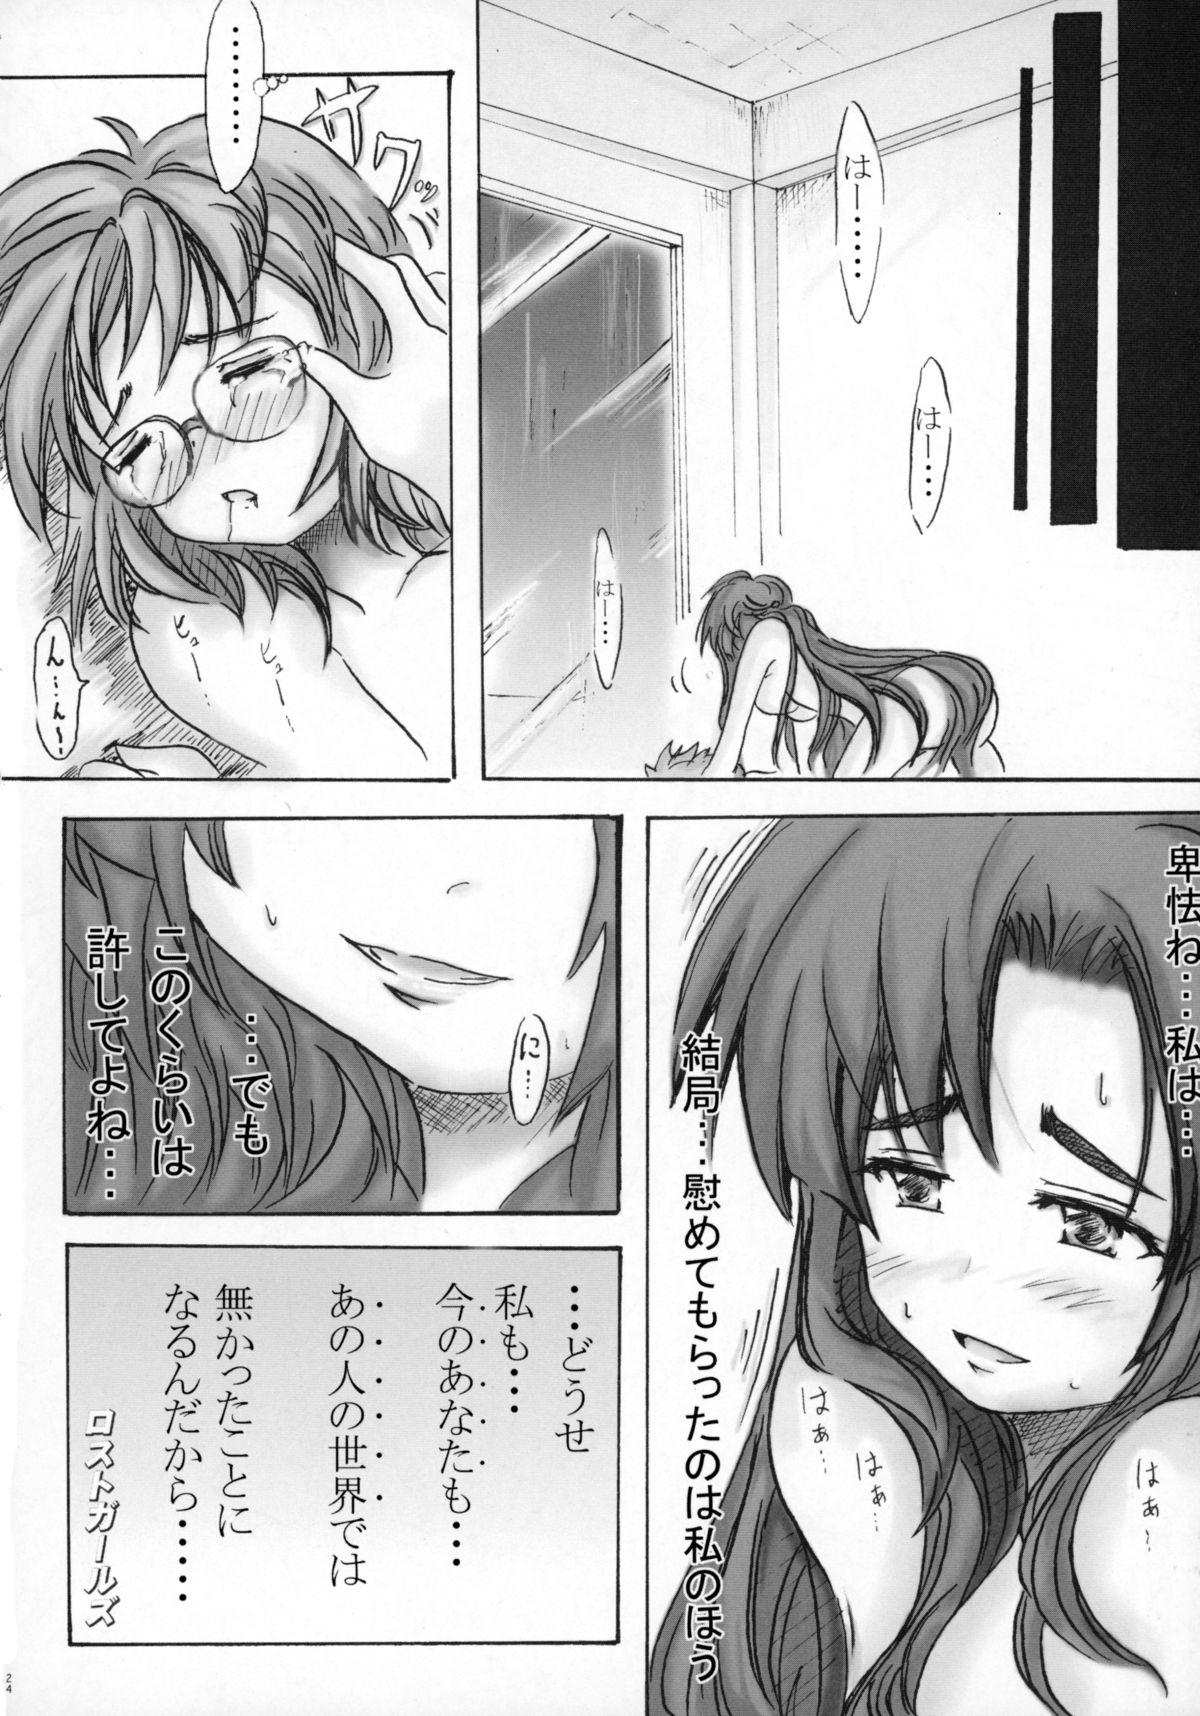 Dirty Lost Girl - The melancholy of haruhi suzumiya Facebook - Page 24